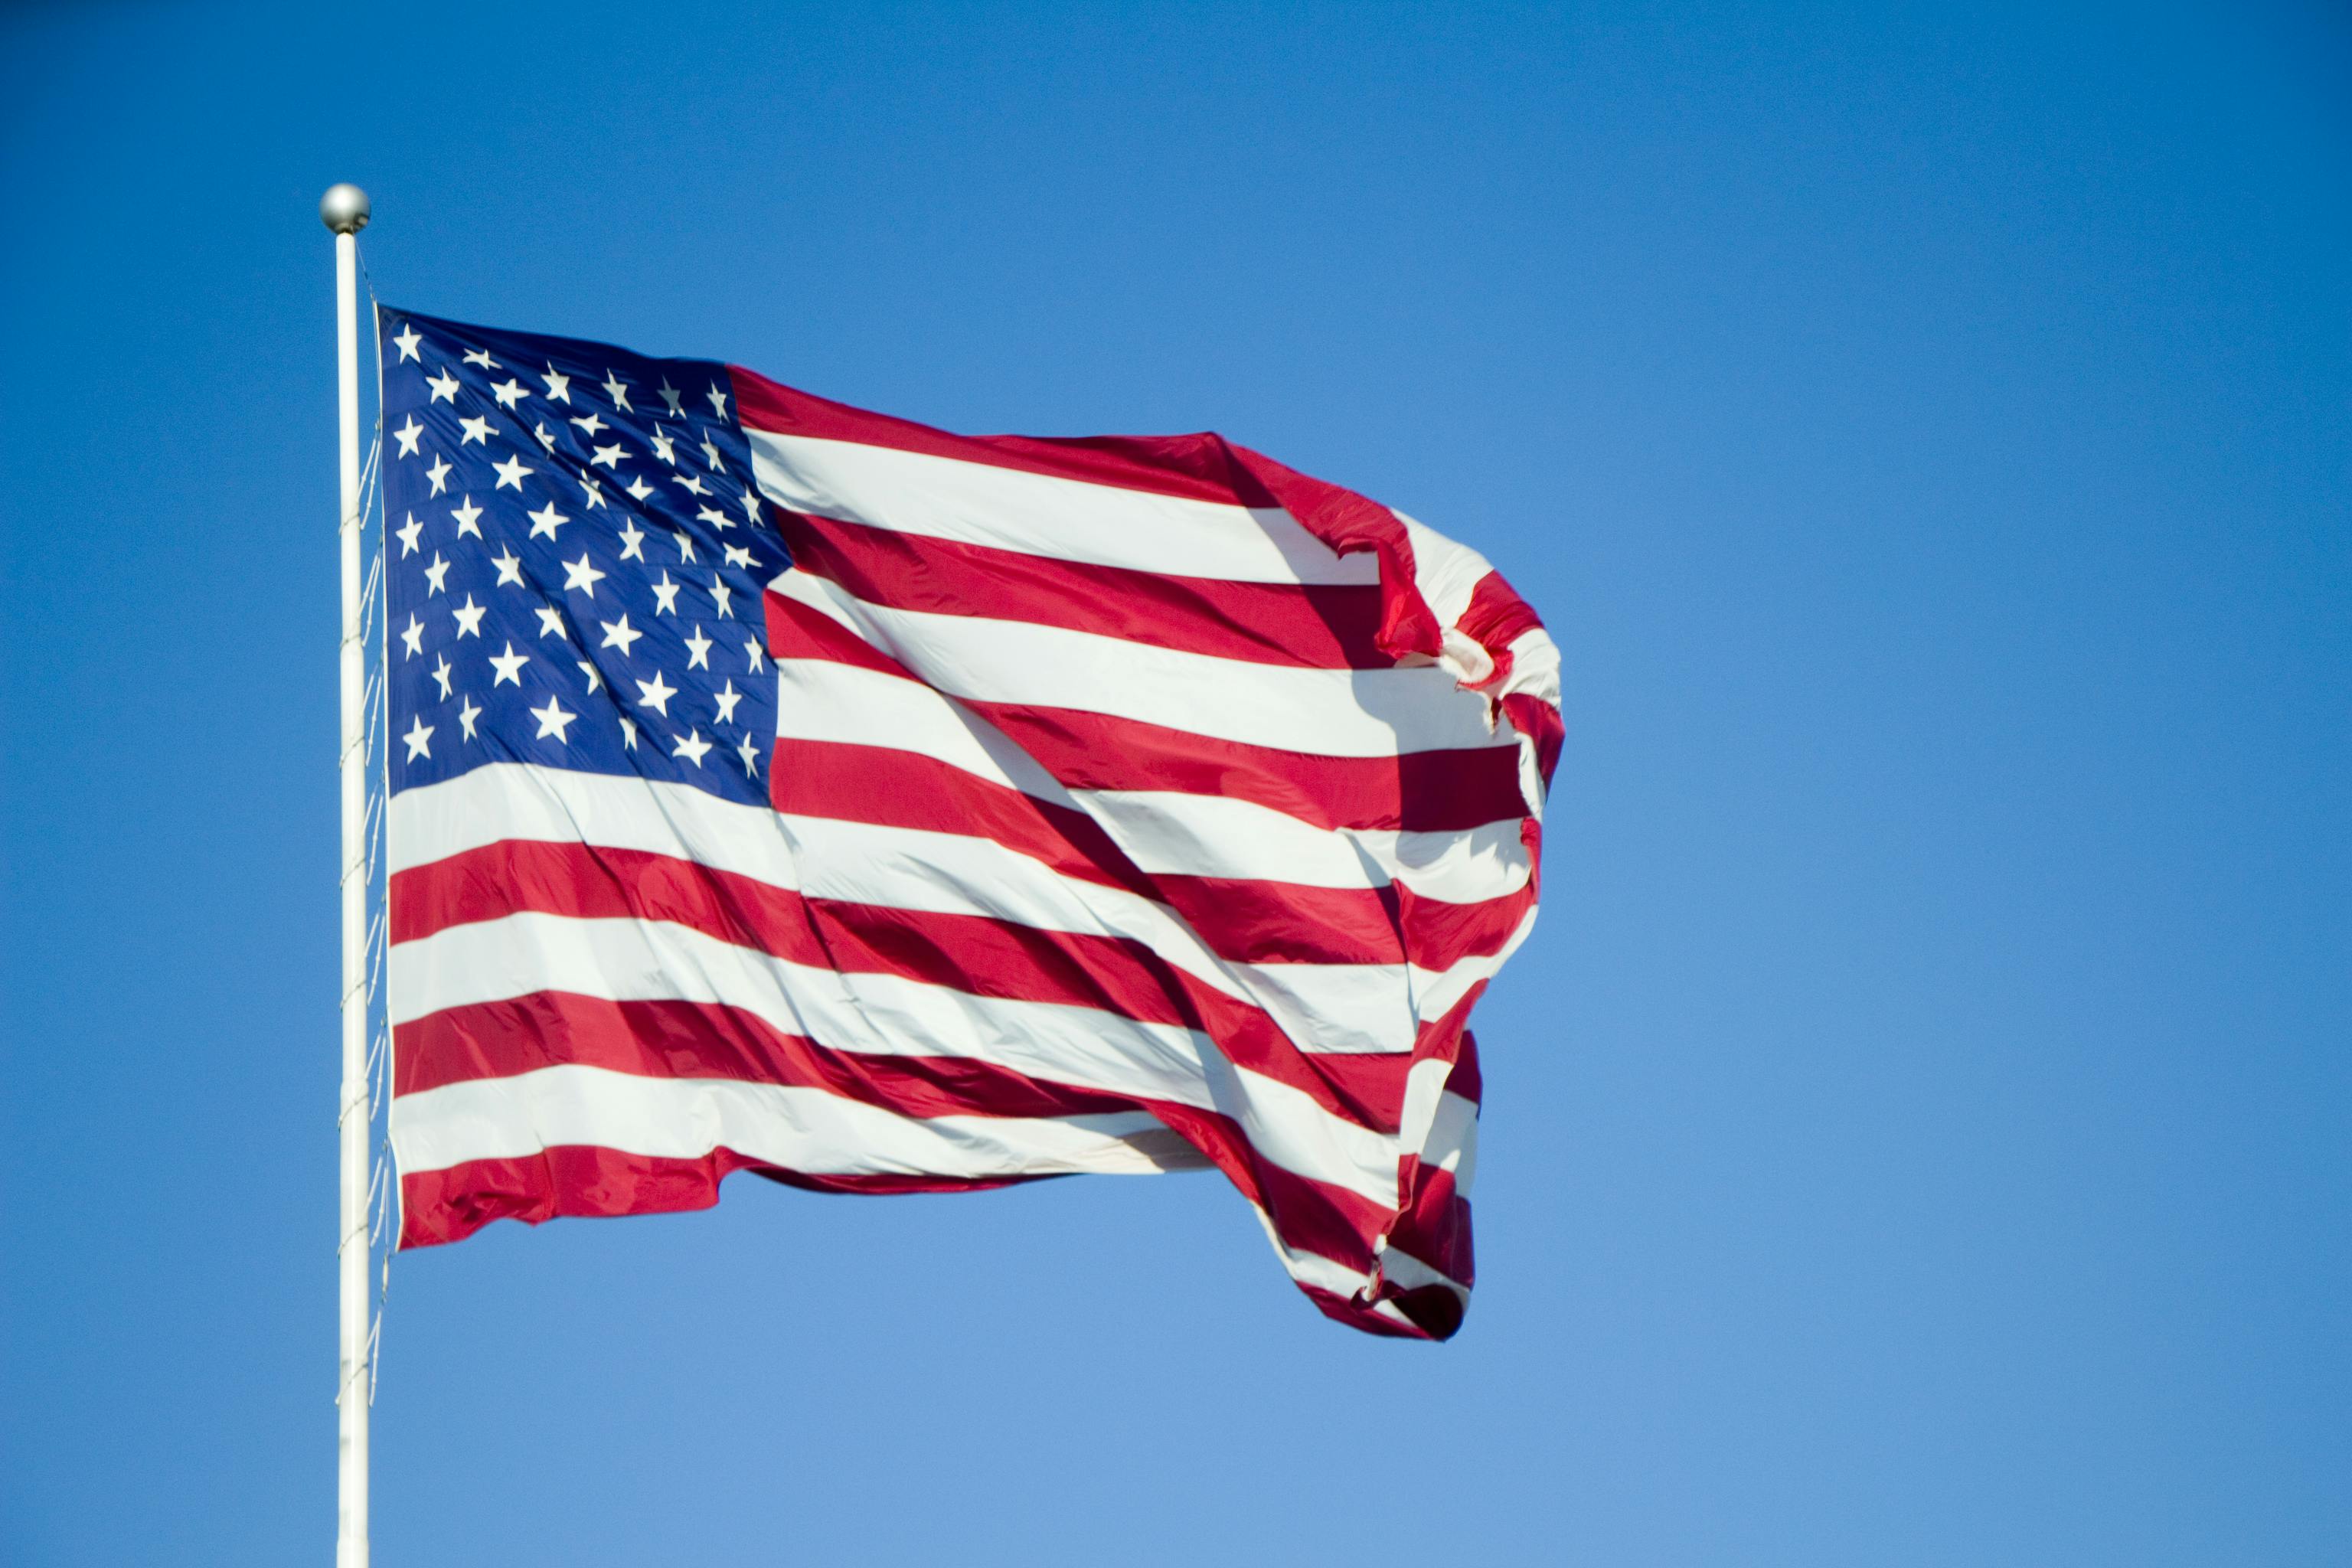 Free stock photo of america, country, nation